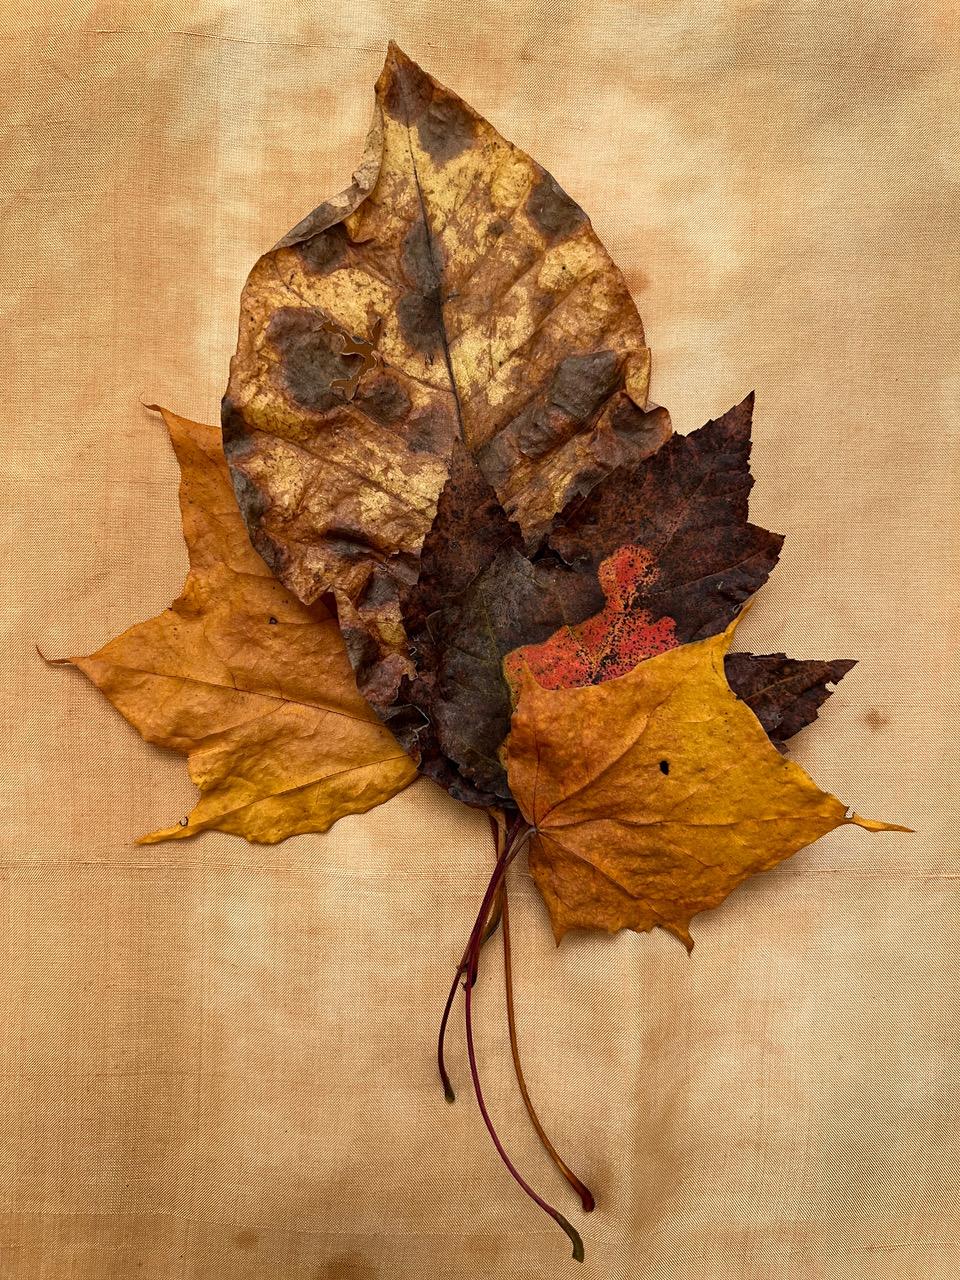 This is a large archival pigment photograph by artist Paul Cava depicting a series of nine still life photographs of autumn leaves arranged in a grid. It is printed on Hahnemuhle Photo Rag professional paper. Image size is approx. 36